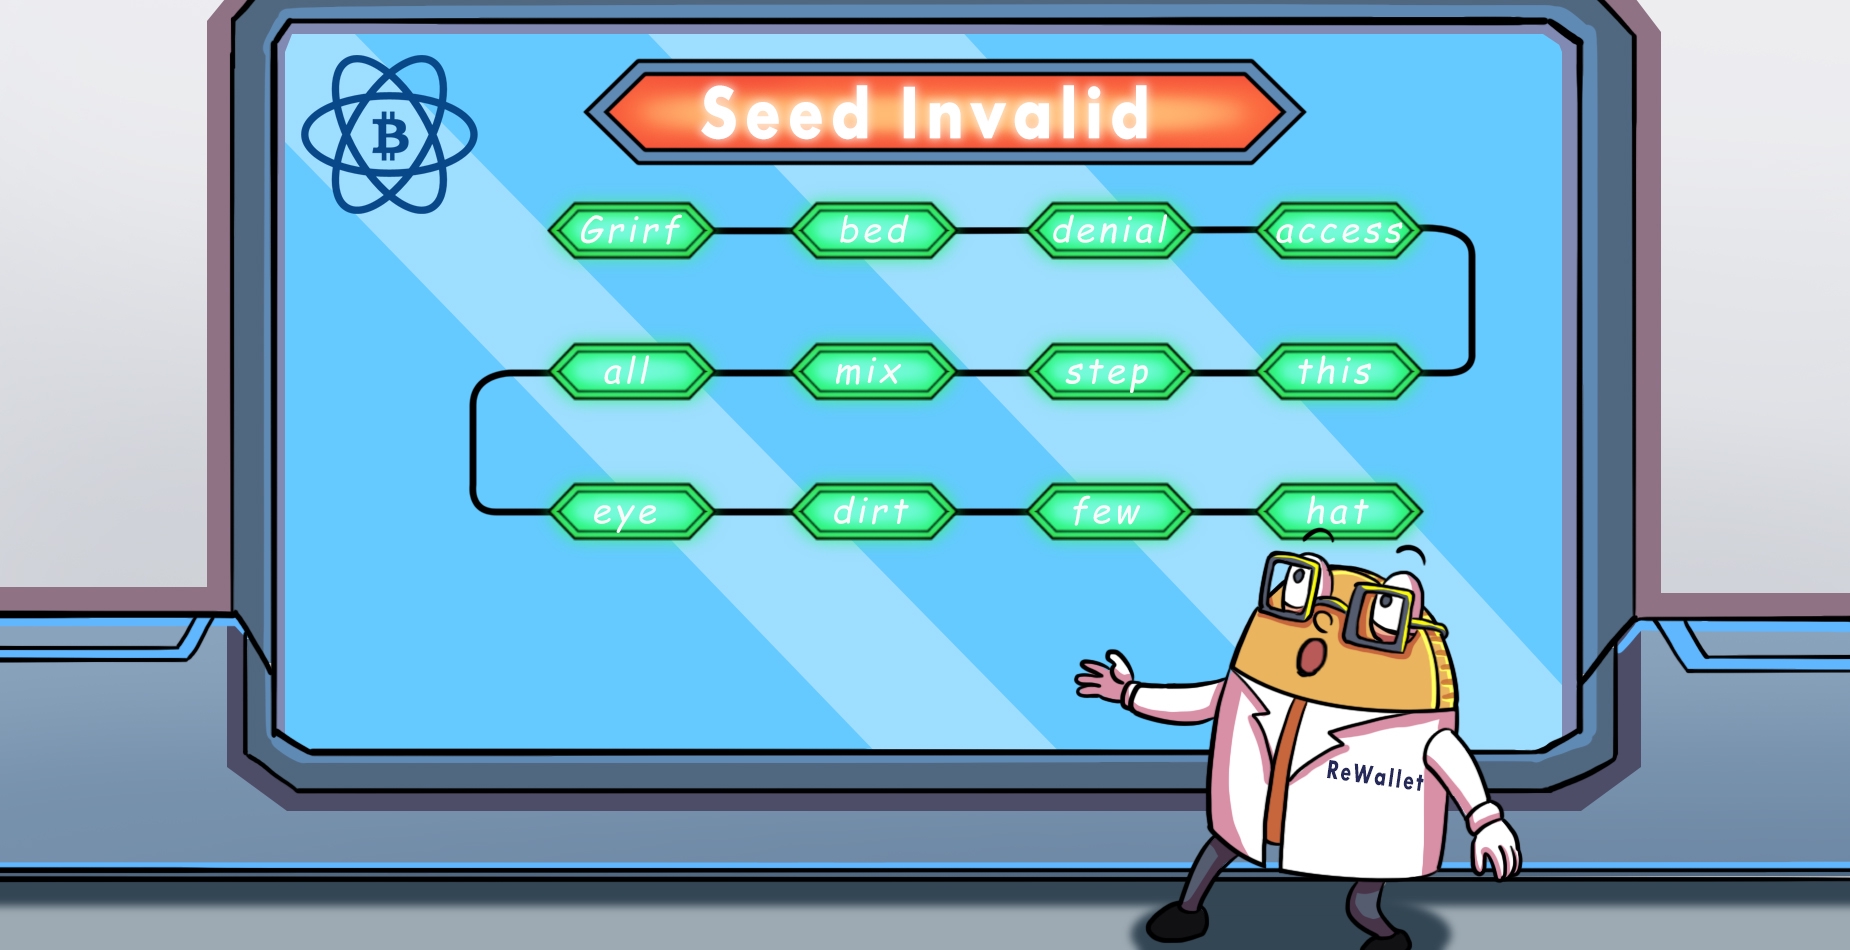 ReWallet scientist exploring the Electrum seed in a laboratory with the message: "Electrum seed invalid" 